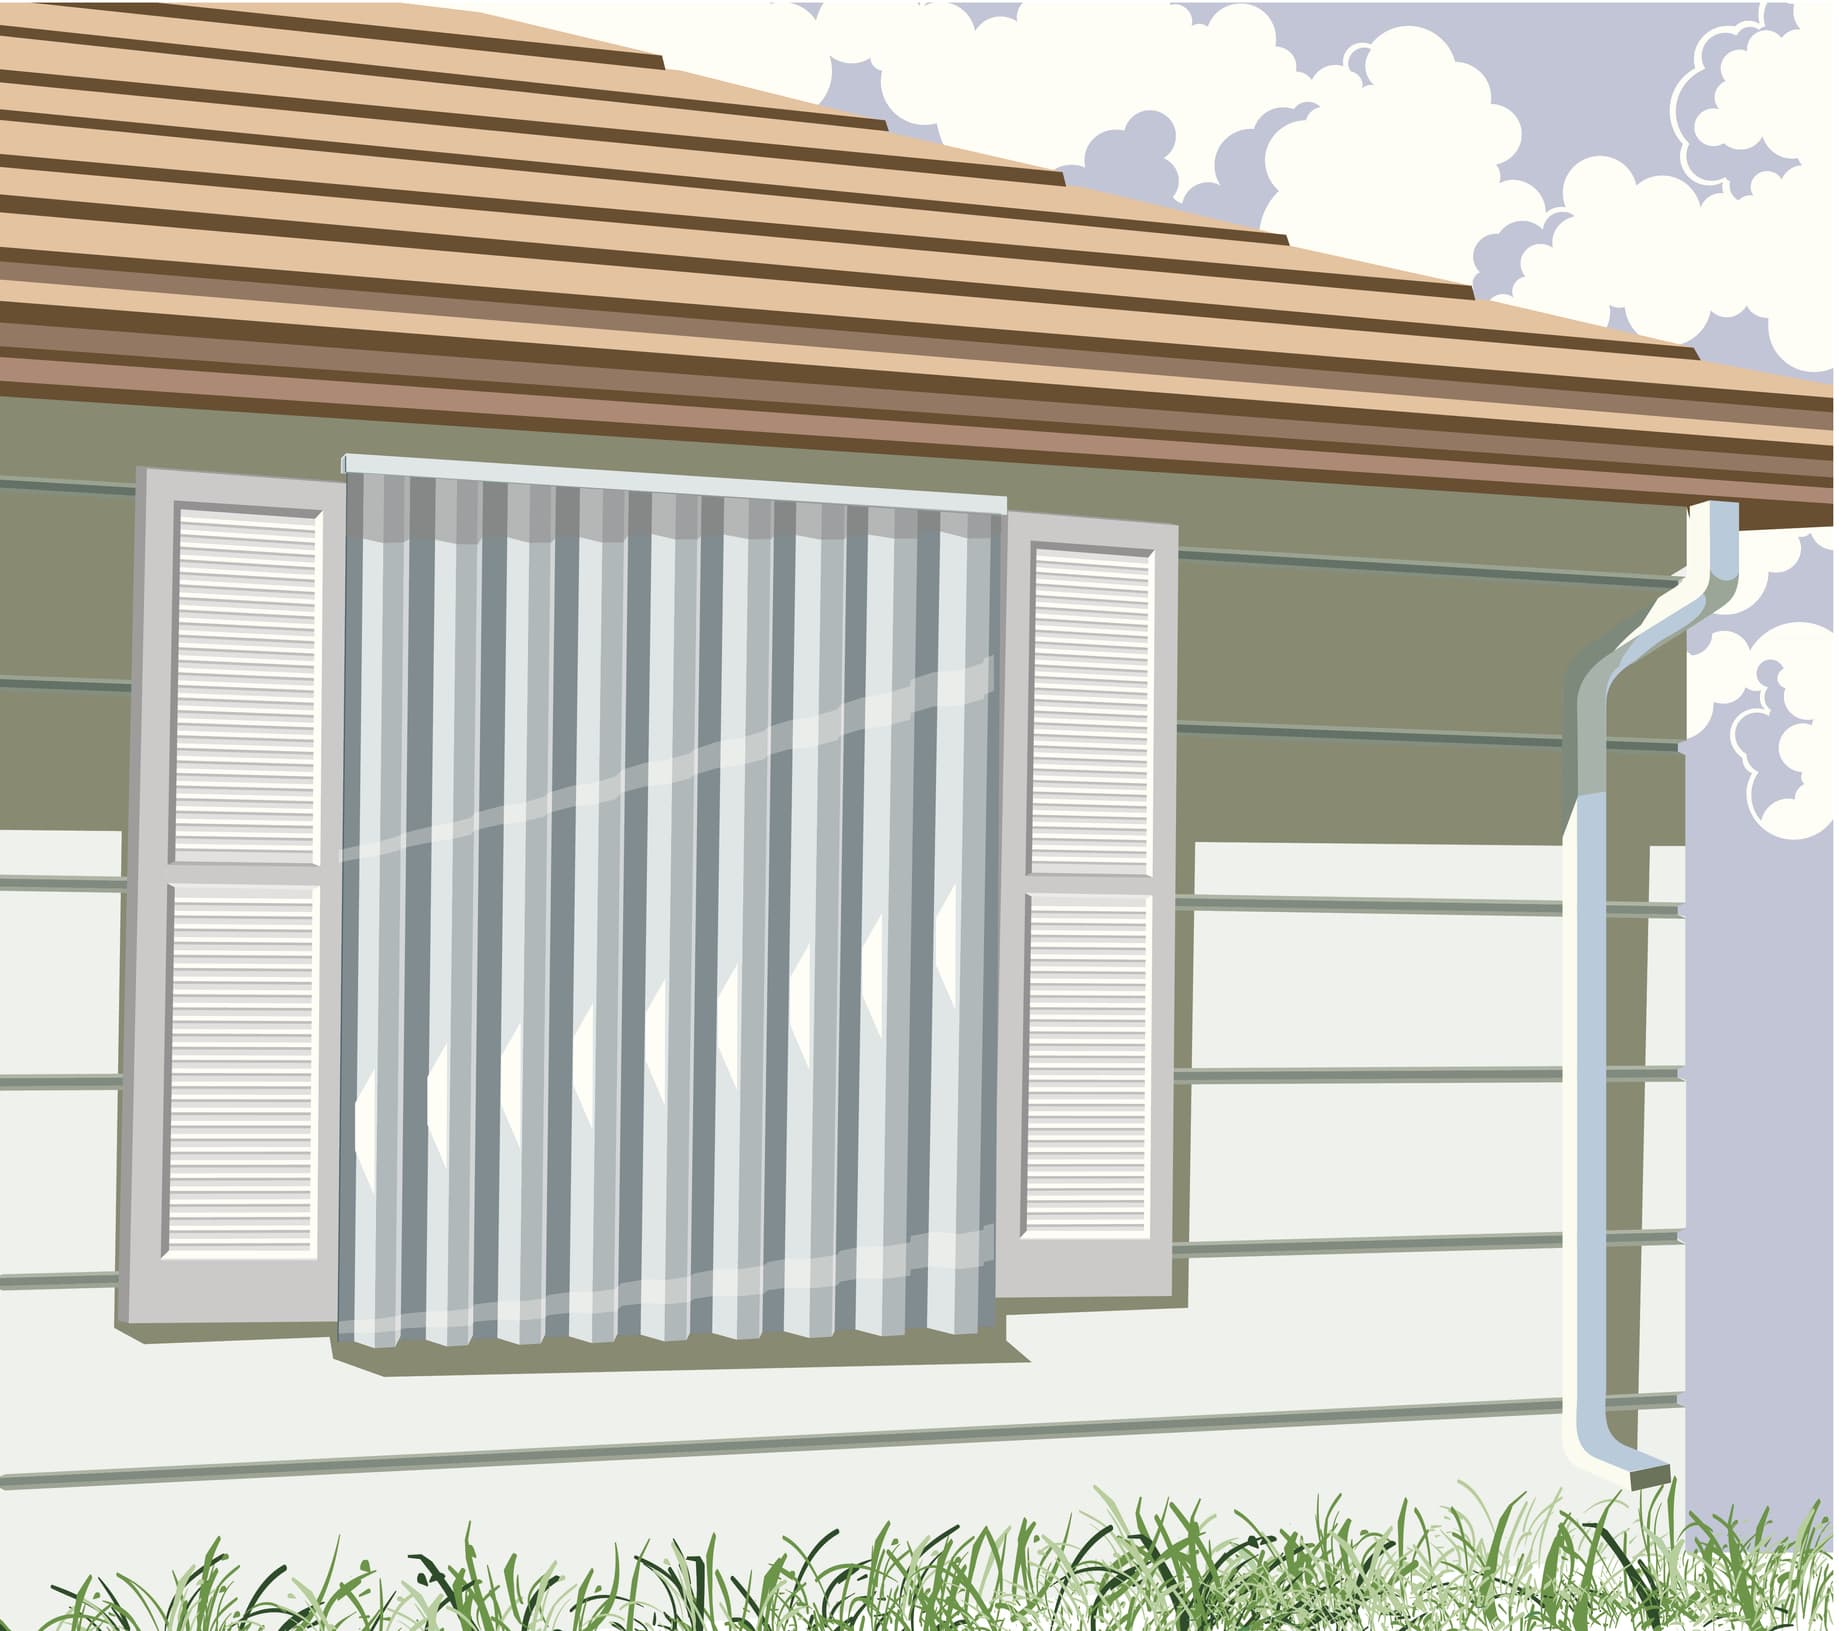 Hurricane Shutters Provide All-Round Benefits to Homes in Florida